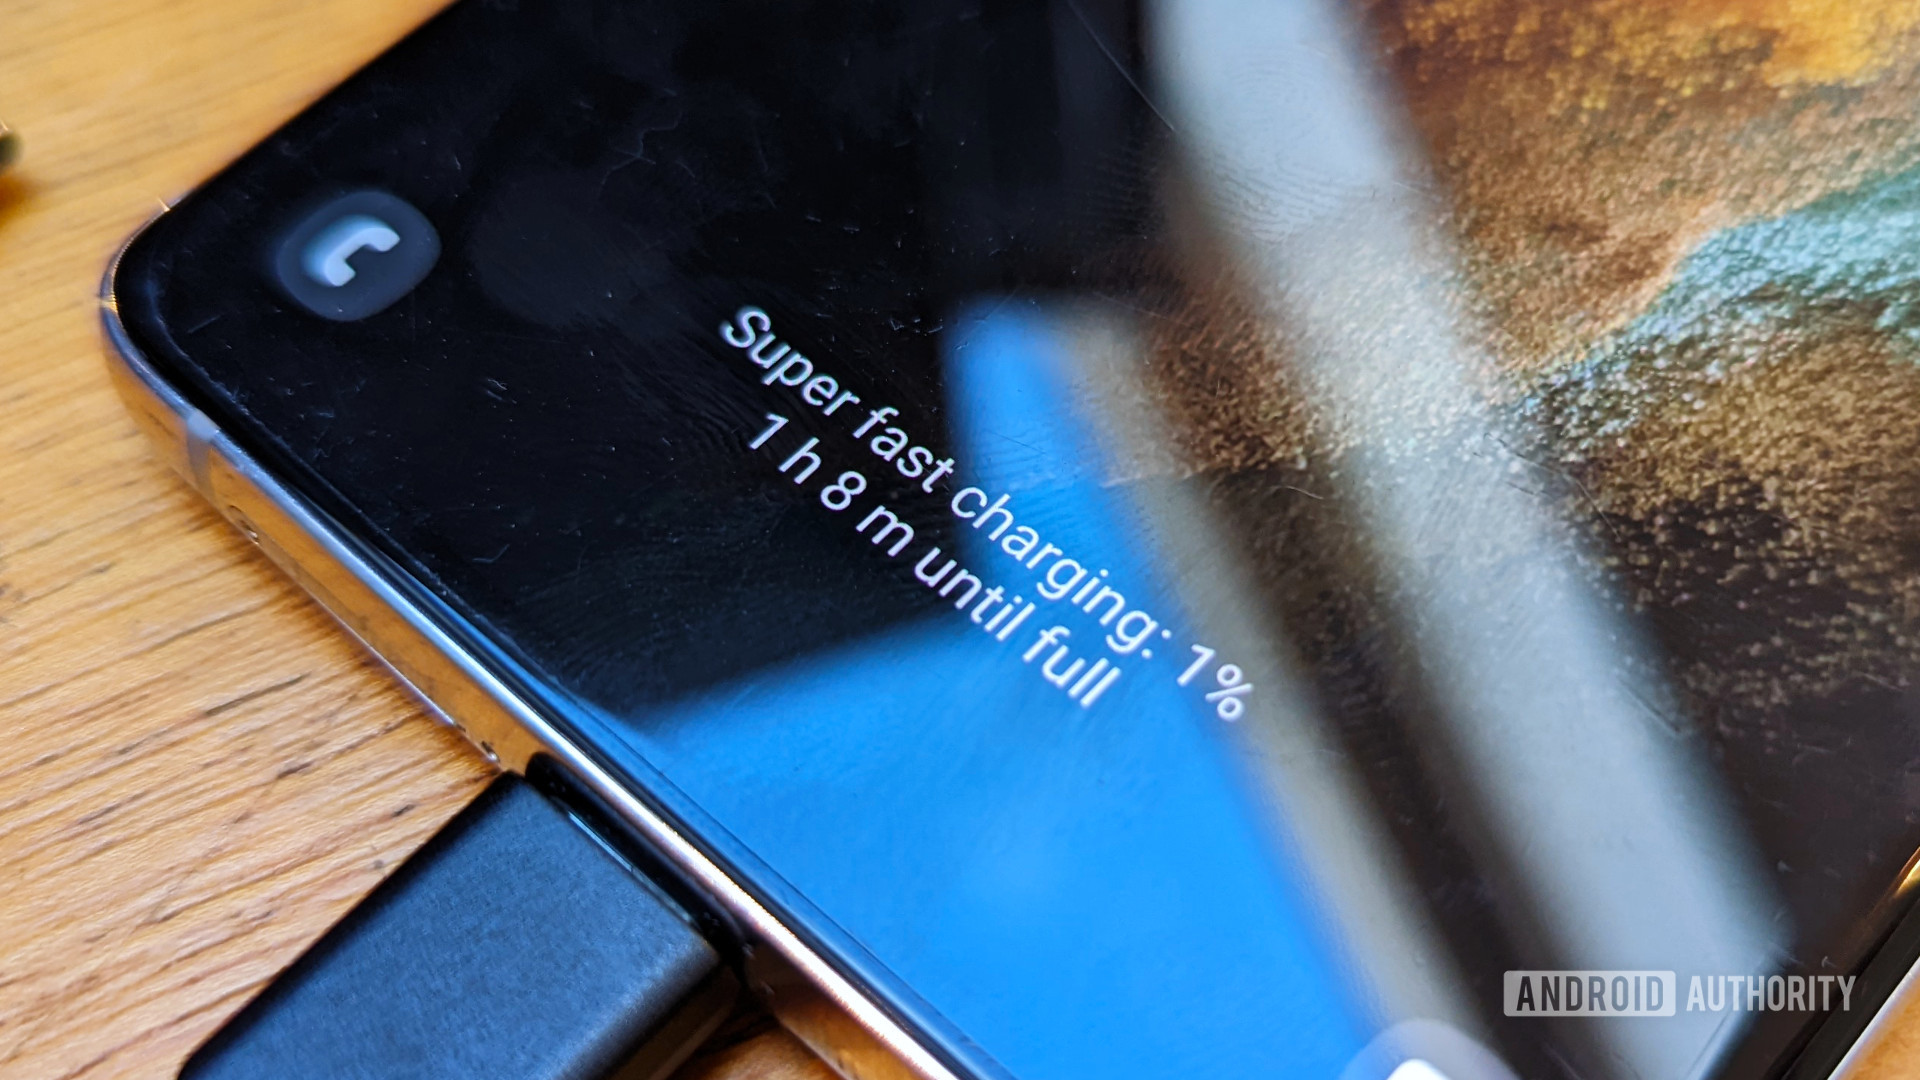 Samsung Super Fast Charging text on screen